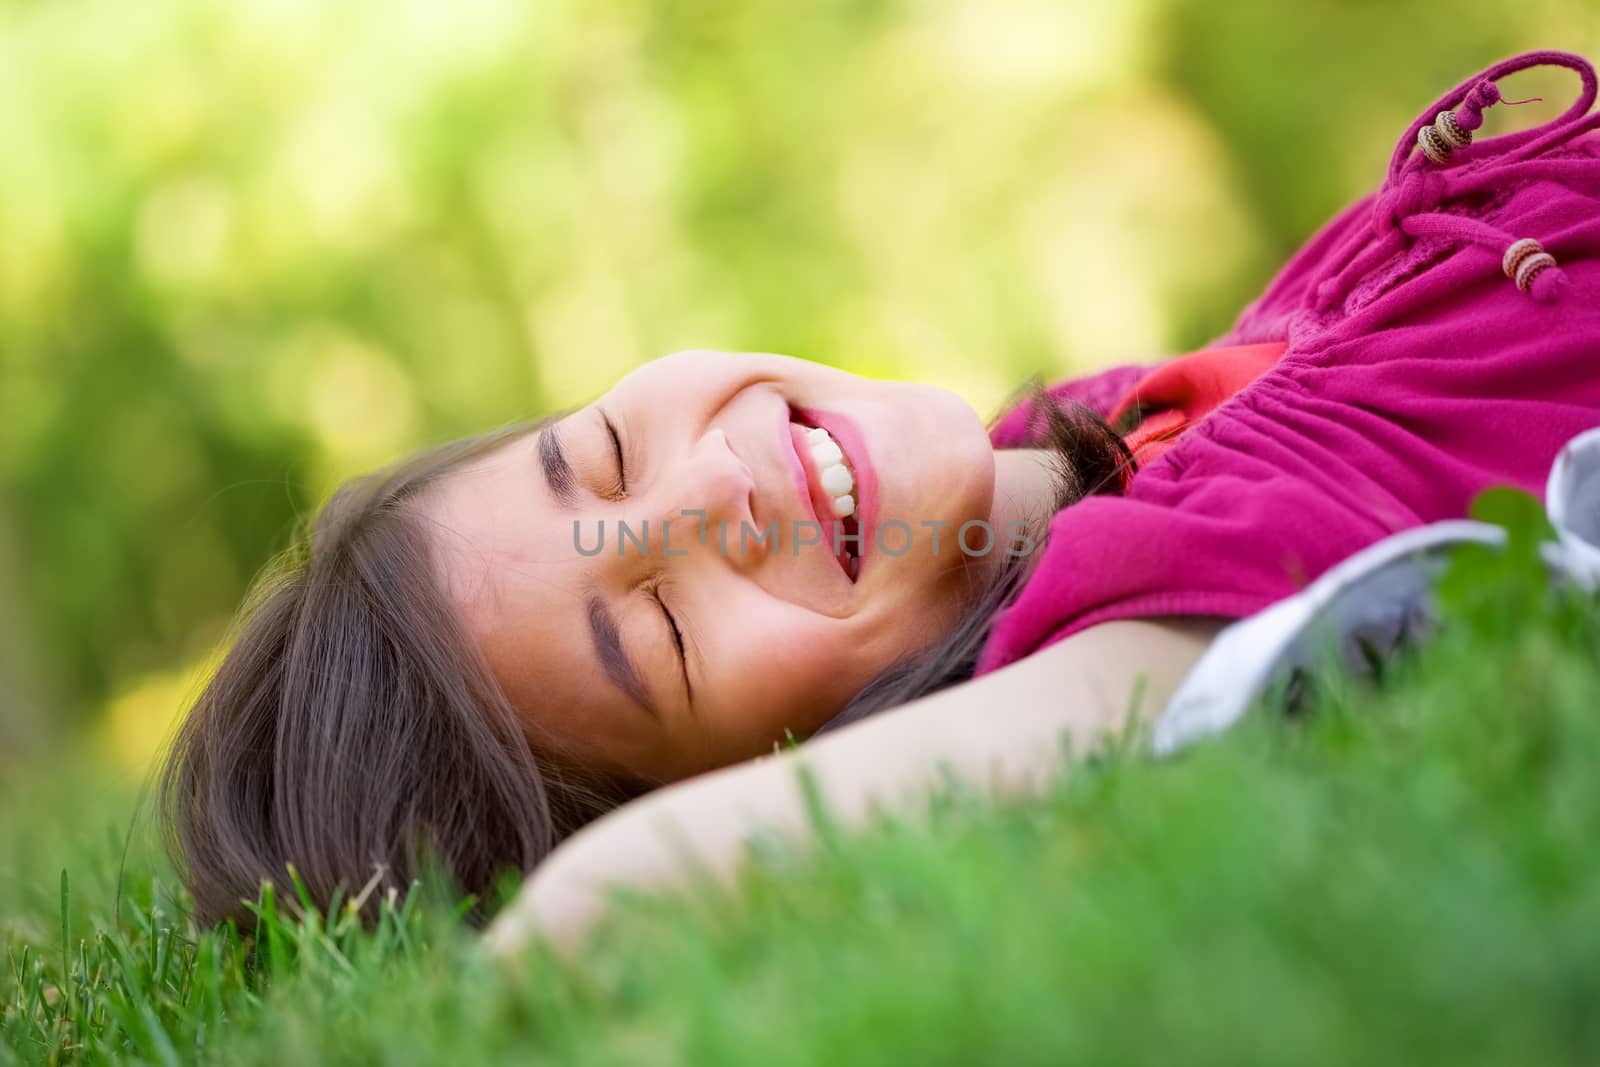 Little girl lying on grass lawn smiling with eyes closed, laughing